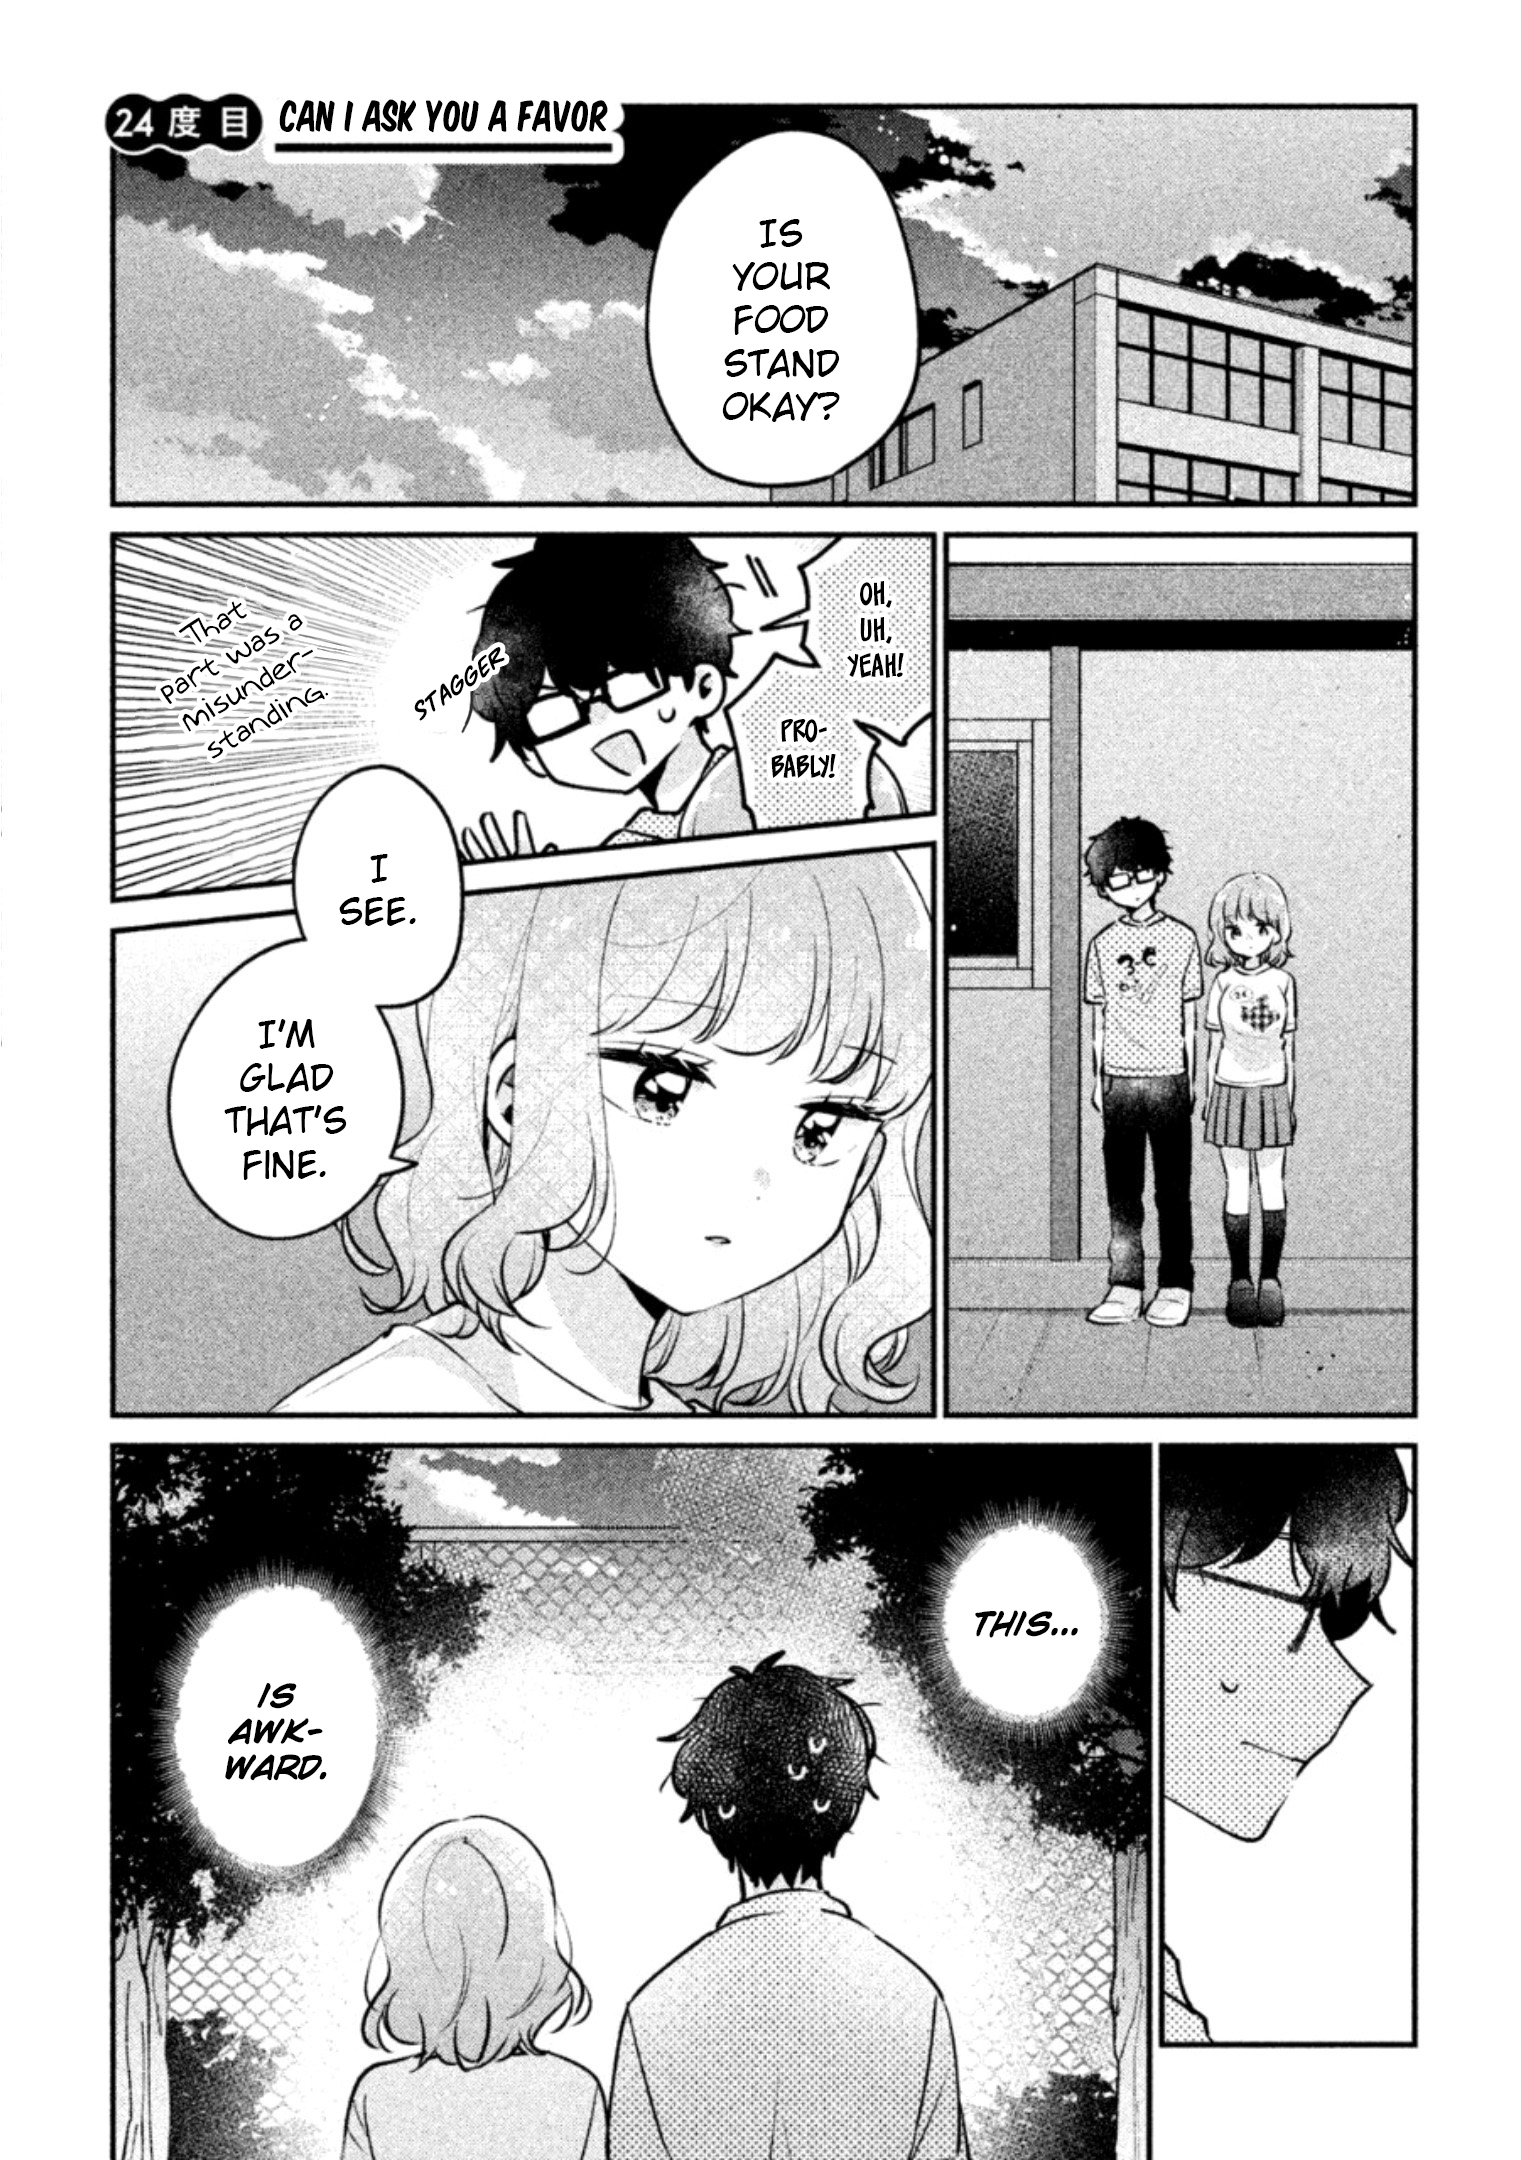 It's Not Meguro-San's First Time Vol.3 Chapter 24: Can I Ask You A Favor - Picture 2